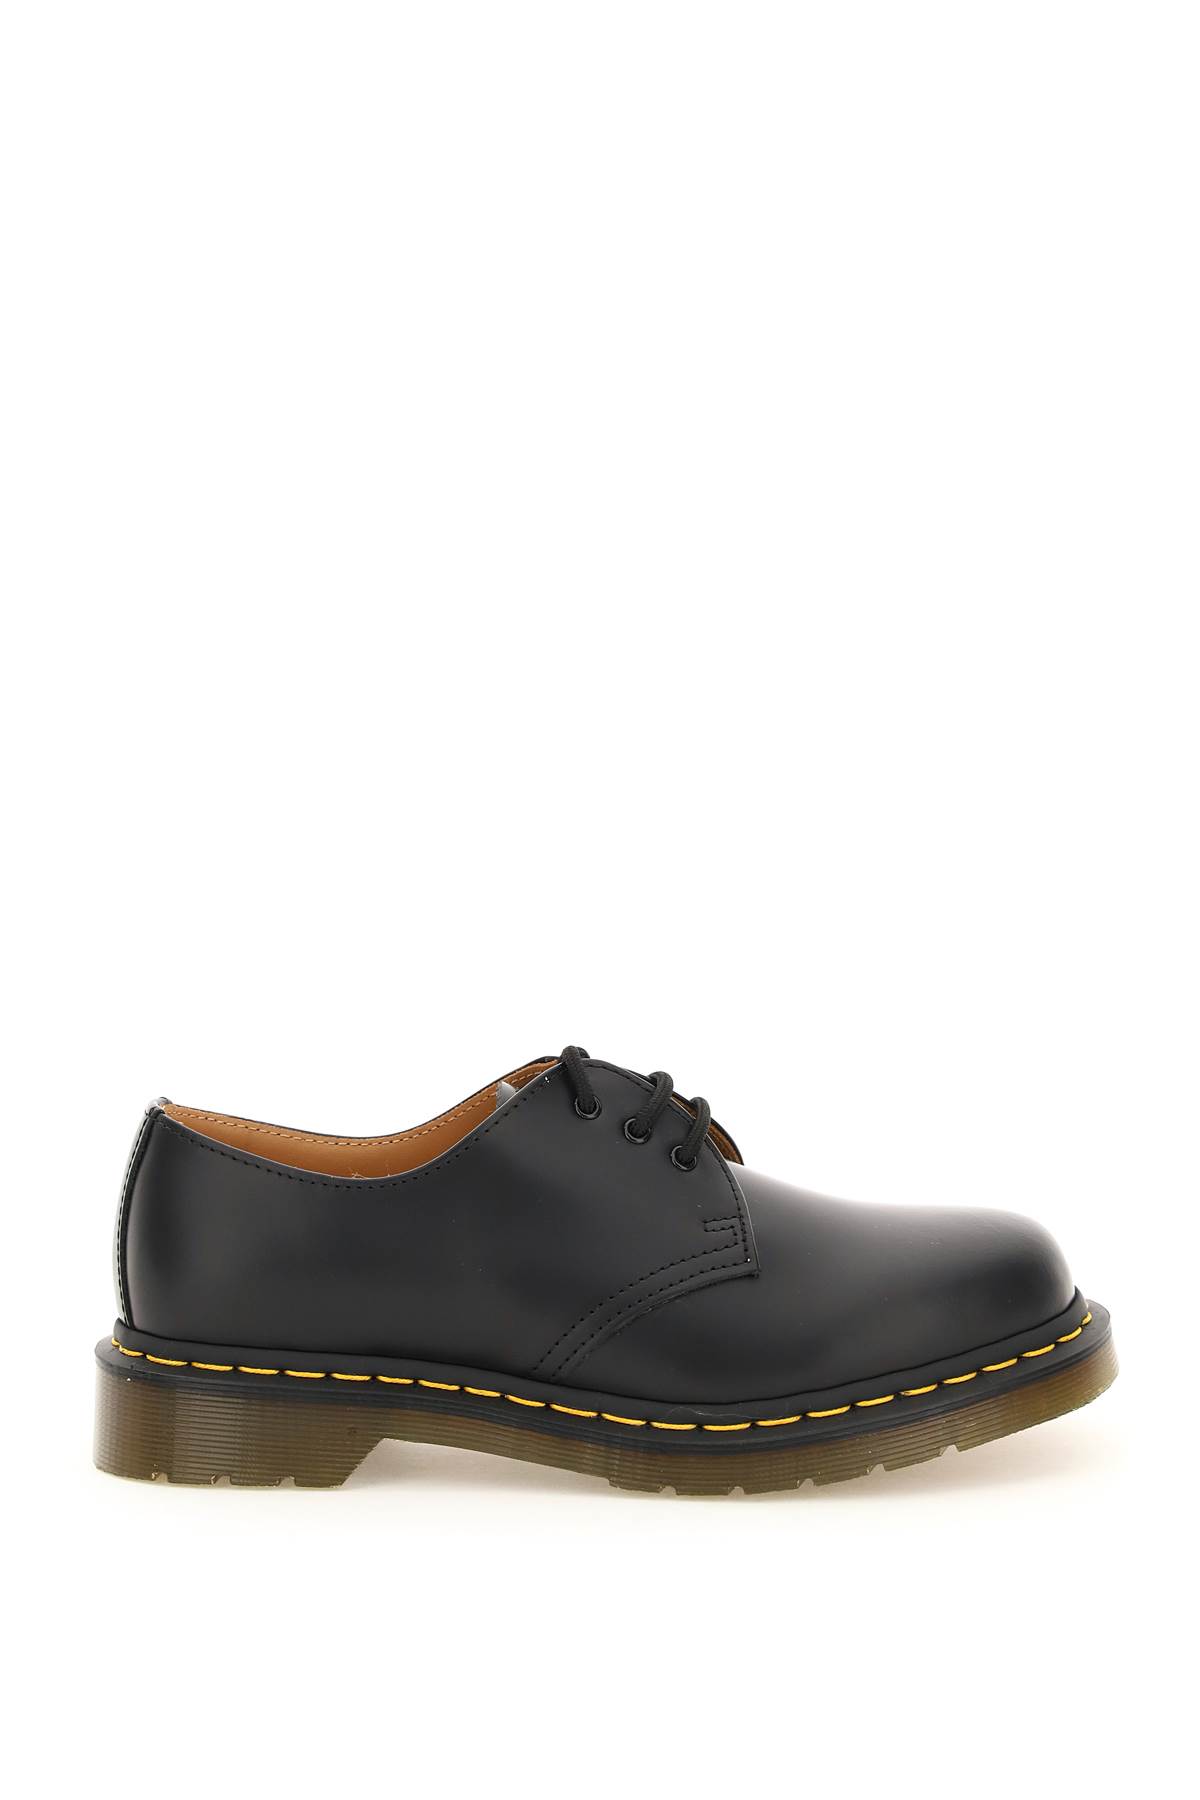 Dr. Martens 1461 Smooth Lace-up Shoes - Black - female - Size: 10